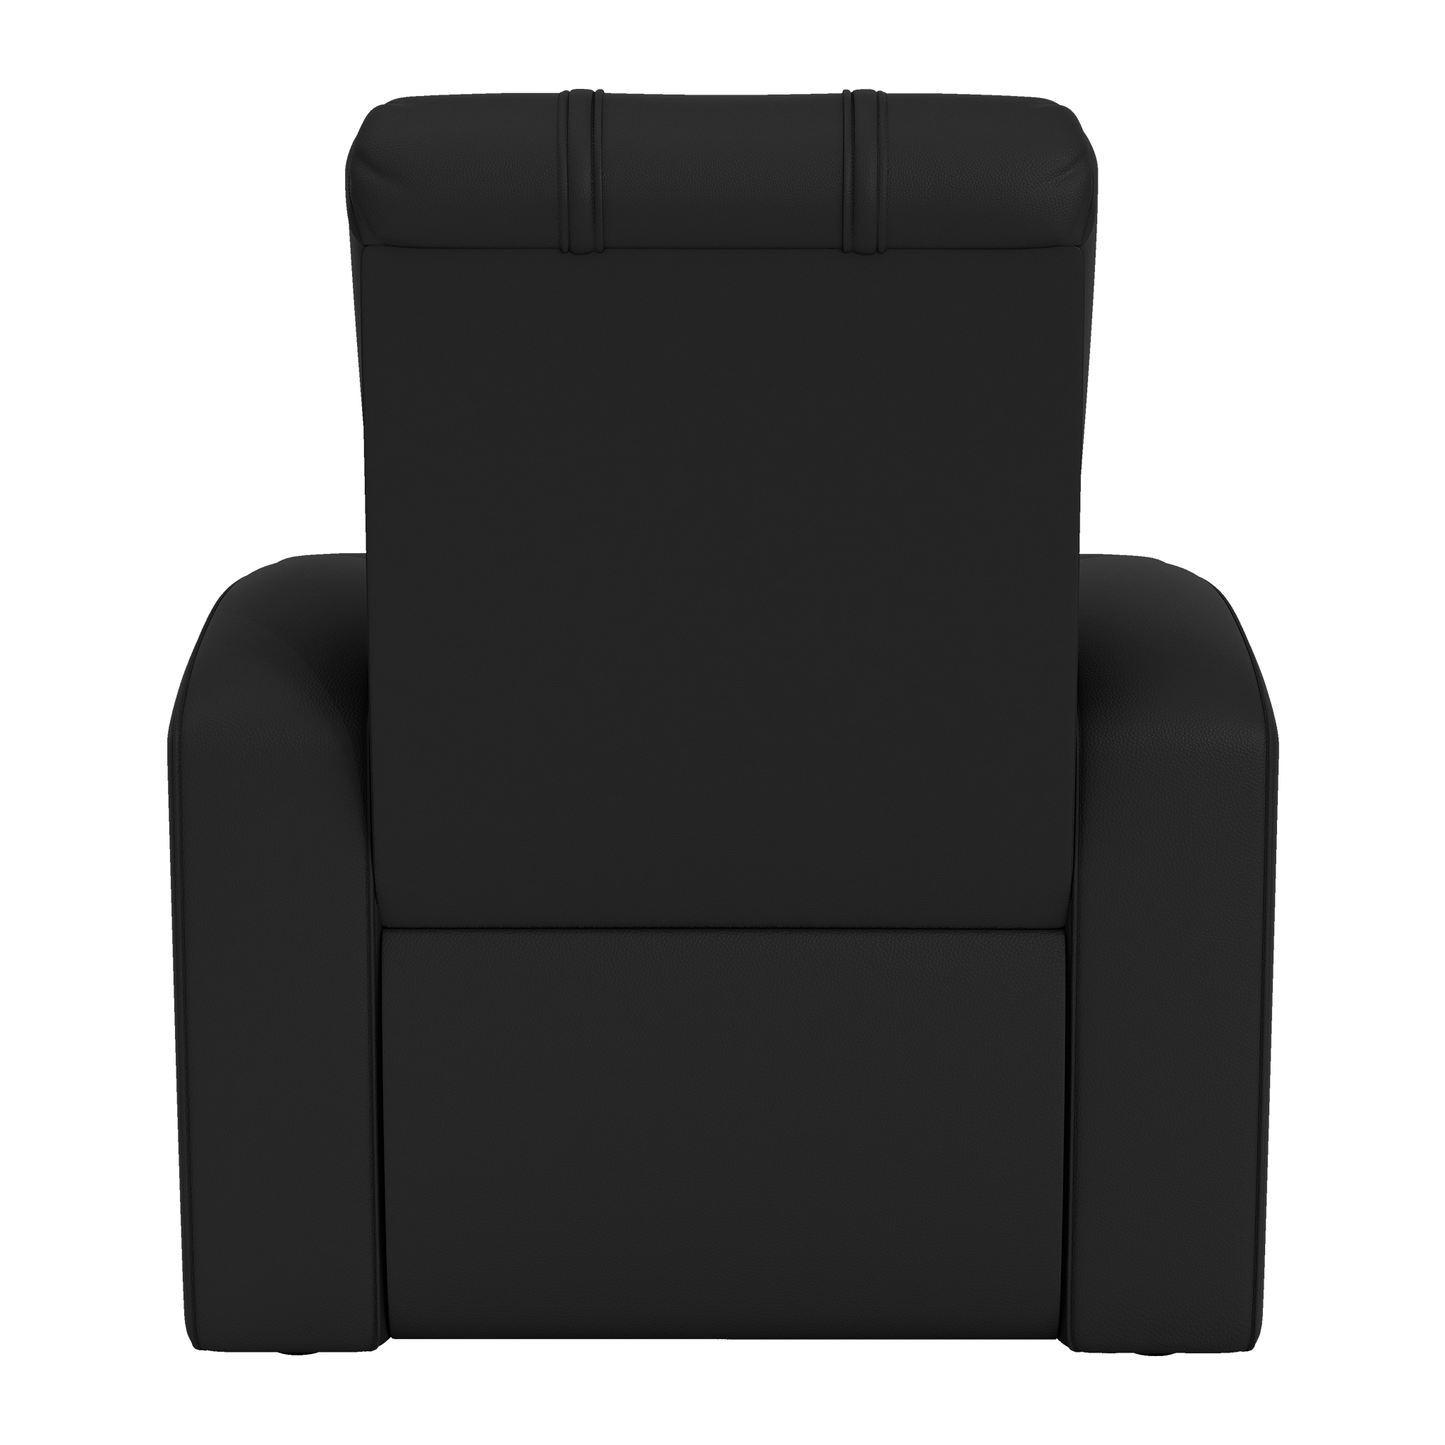 Relax Home Theater Recliner with Iowa Hawkeyes Logo